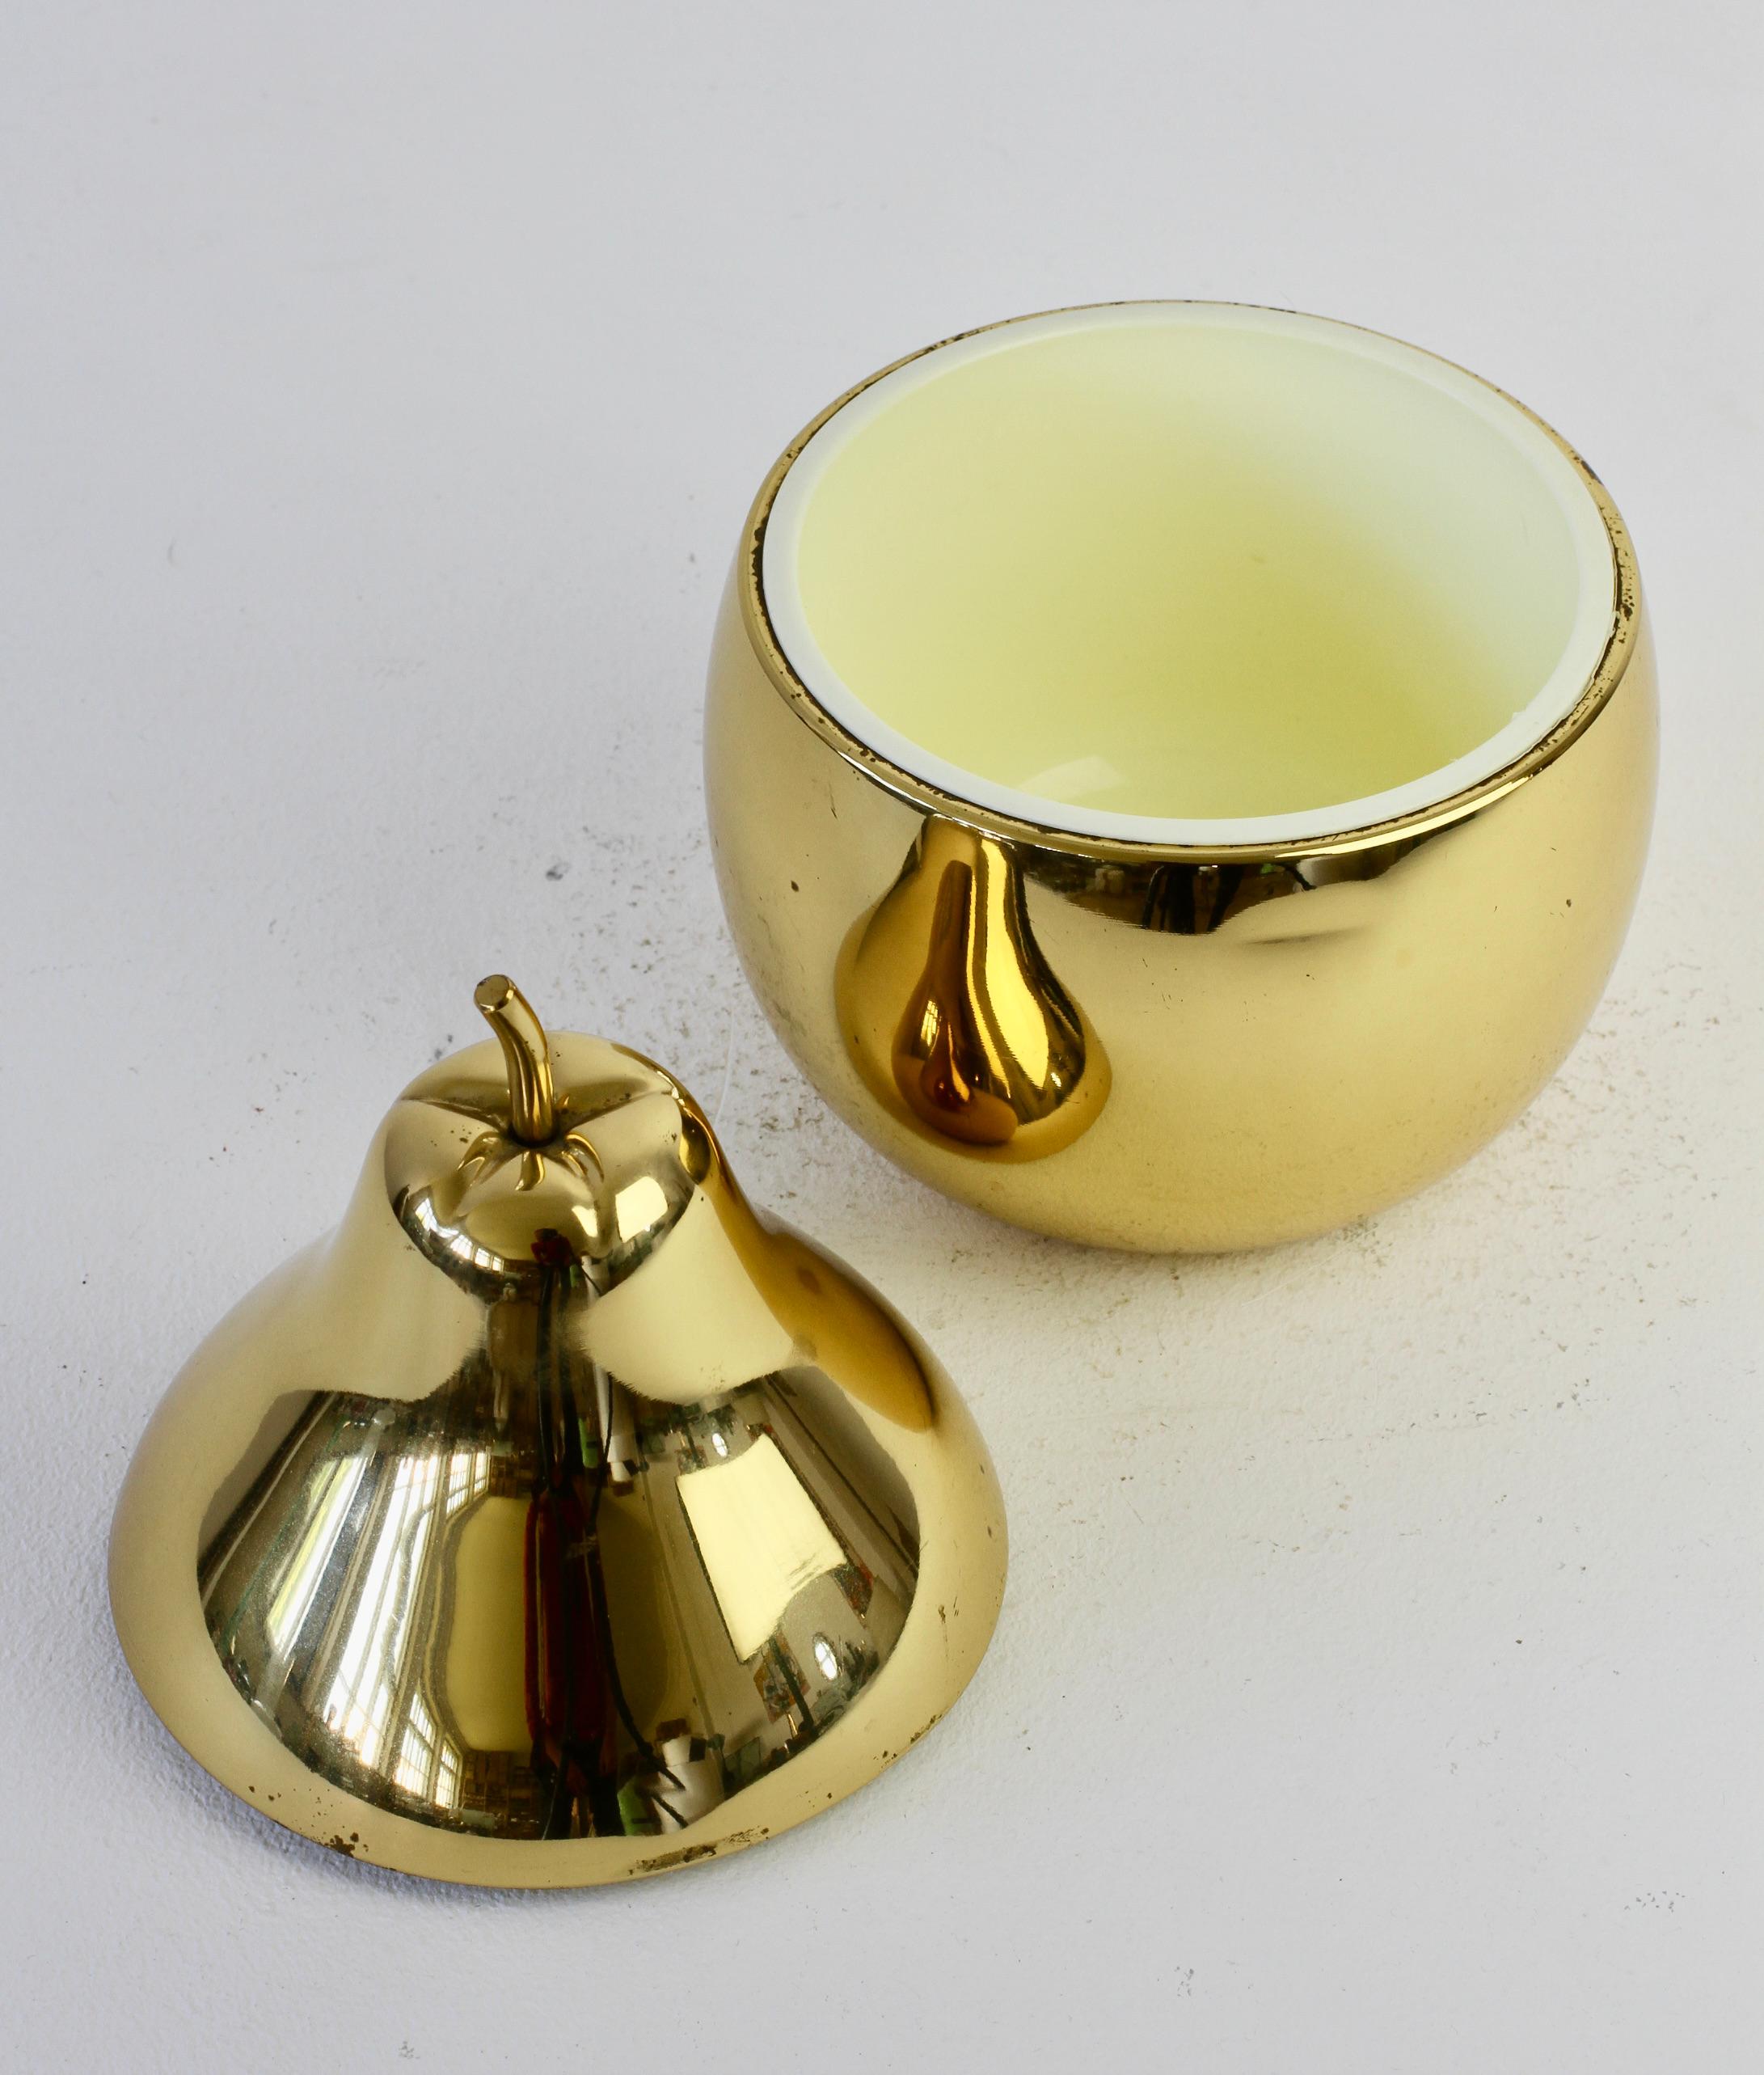 Ettore Sottsass Style Vintage Pear Shaped Brass Ice Cube Bucket or Holder, 1970s For Sale 2